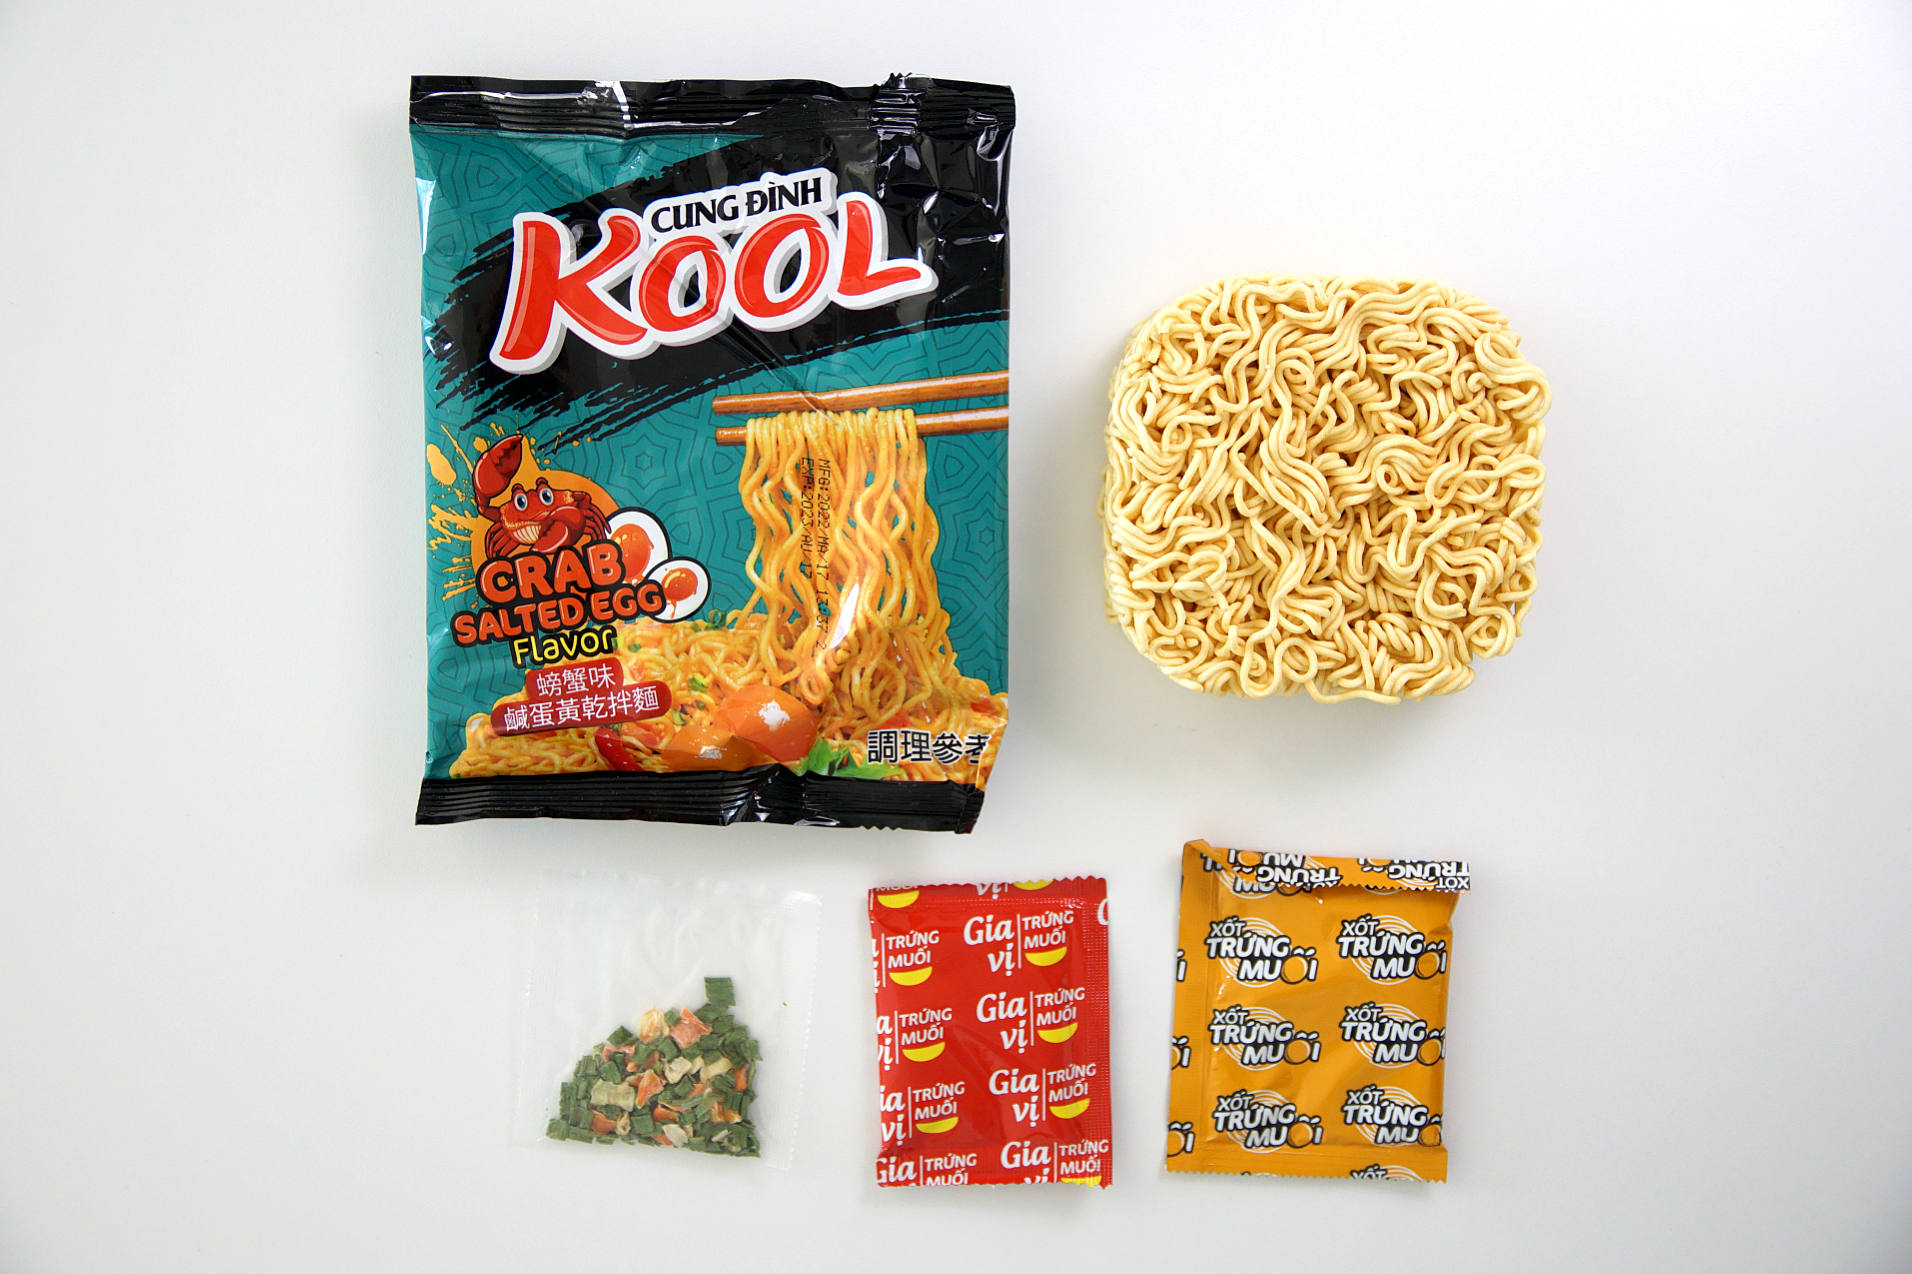 Salted crab noodles and seasoning packets